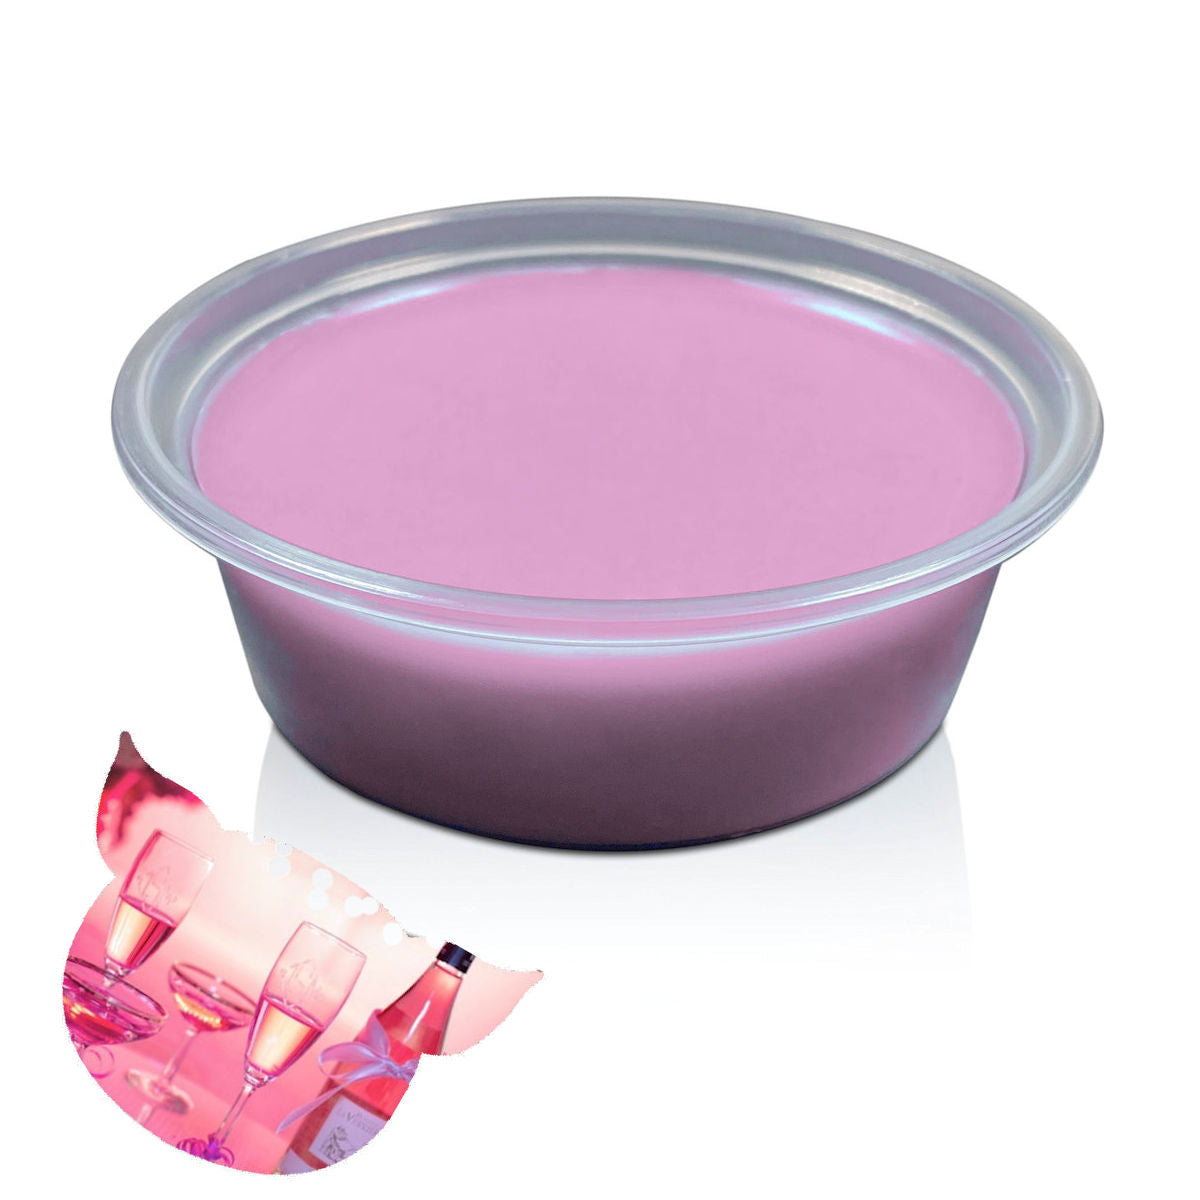 Stinky Pig Highly Scented Soy Wax Melt Pot - 40g Pink Champagne